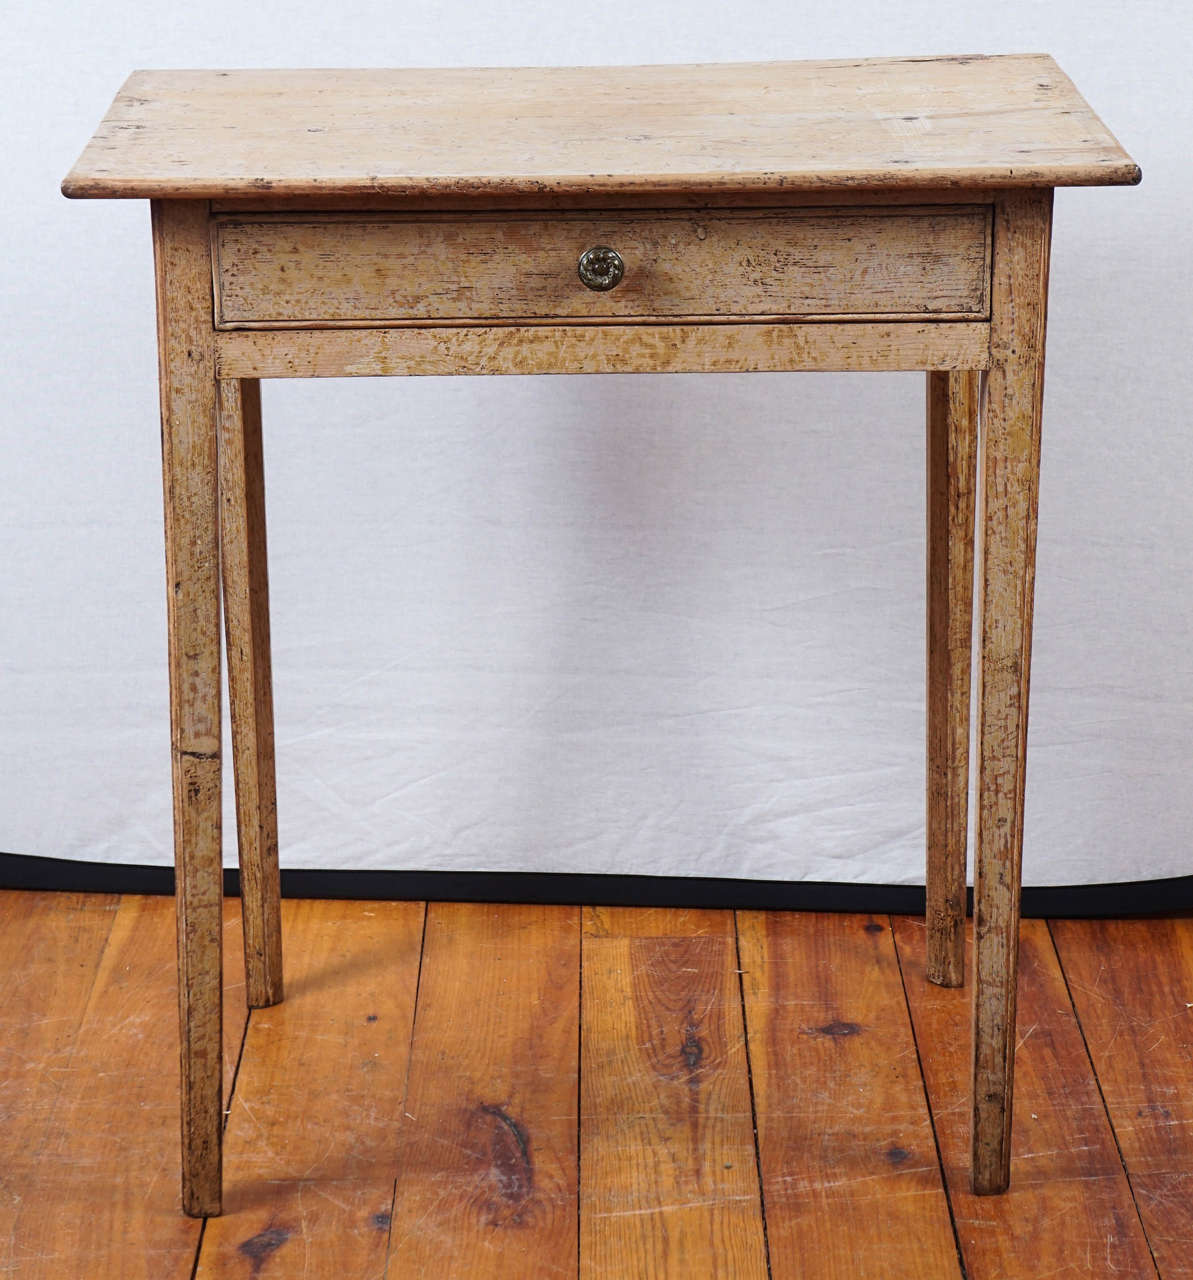 This sweet original painted small table will fit in any room. Very dainty with thin straight legs and a drawer it is a lovely butter color. Original paint makes this piece very special.